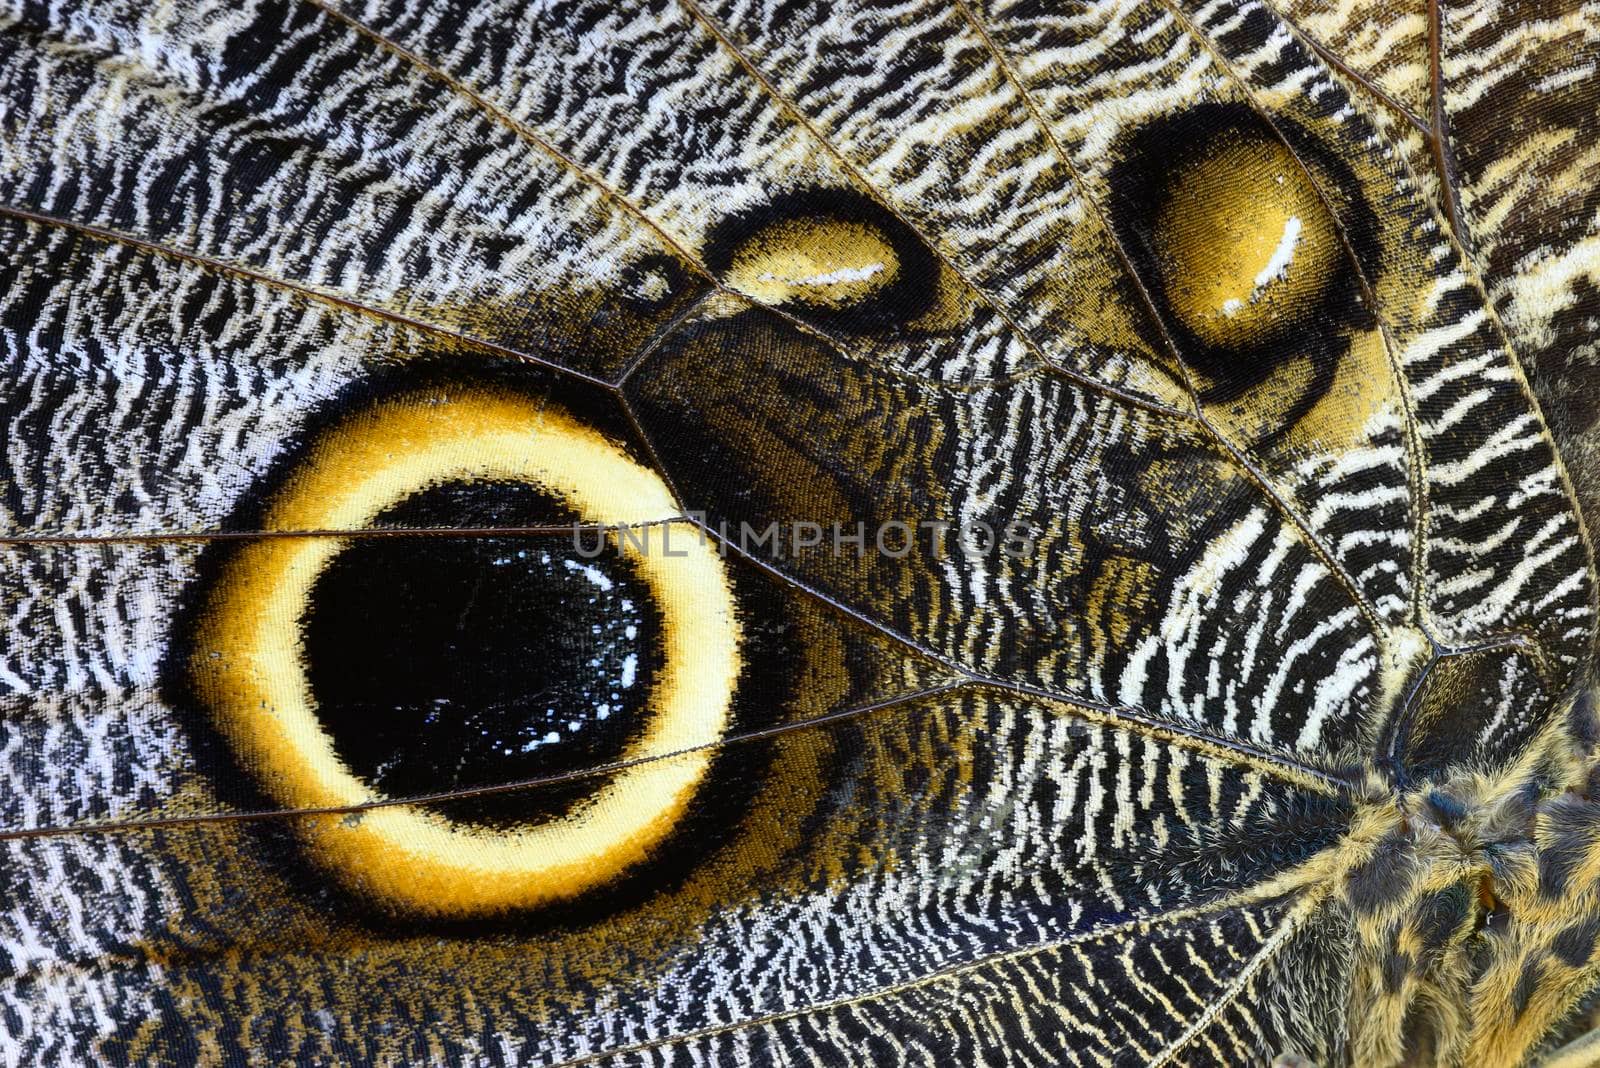 Detail of Morpho tropical butterfy wing with eye spots